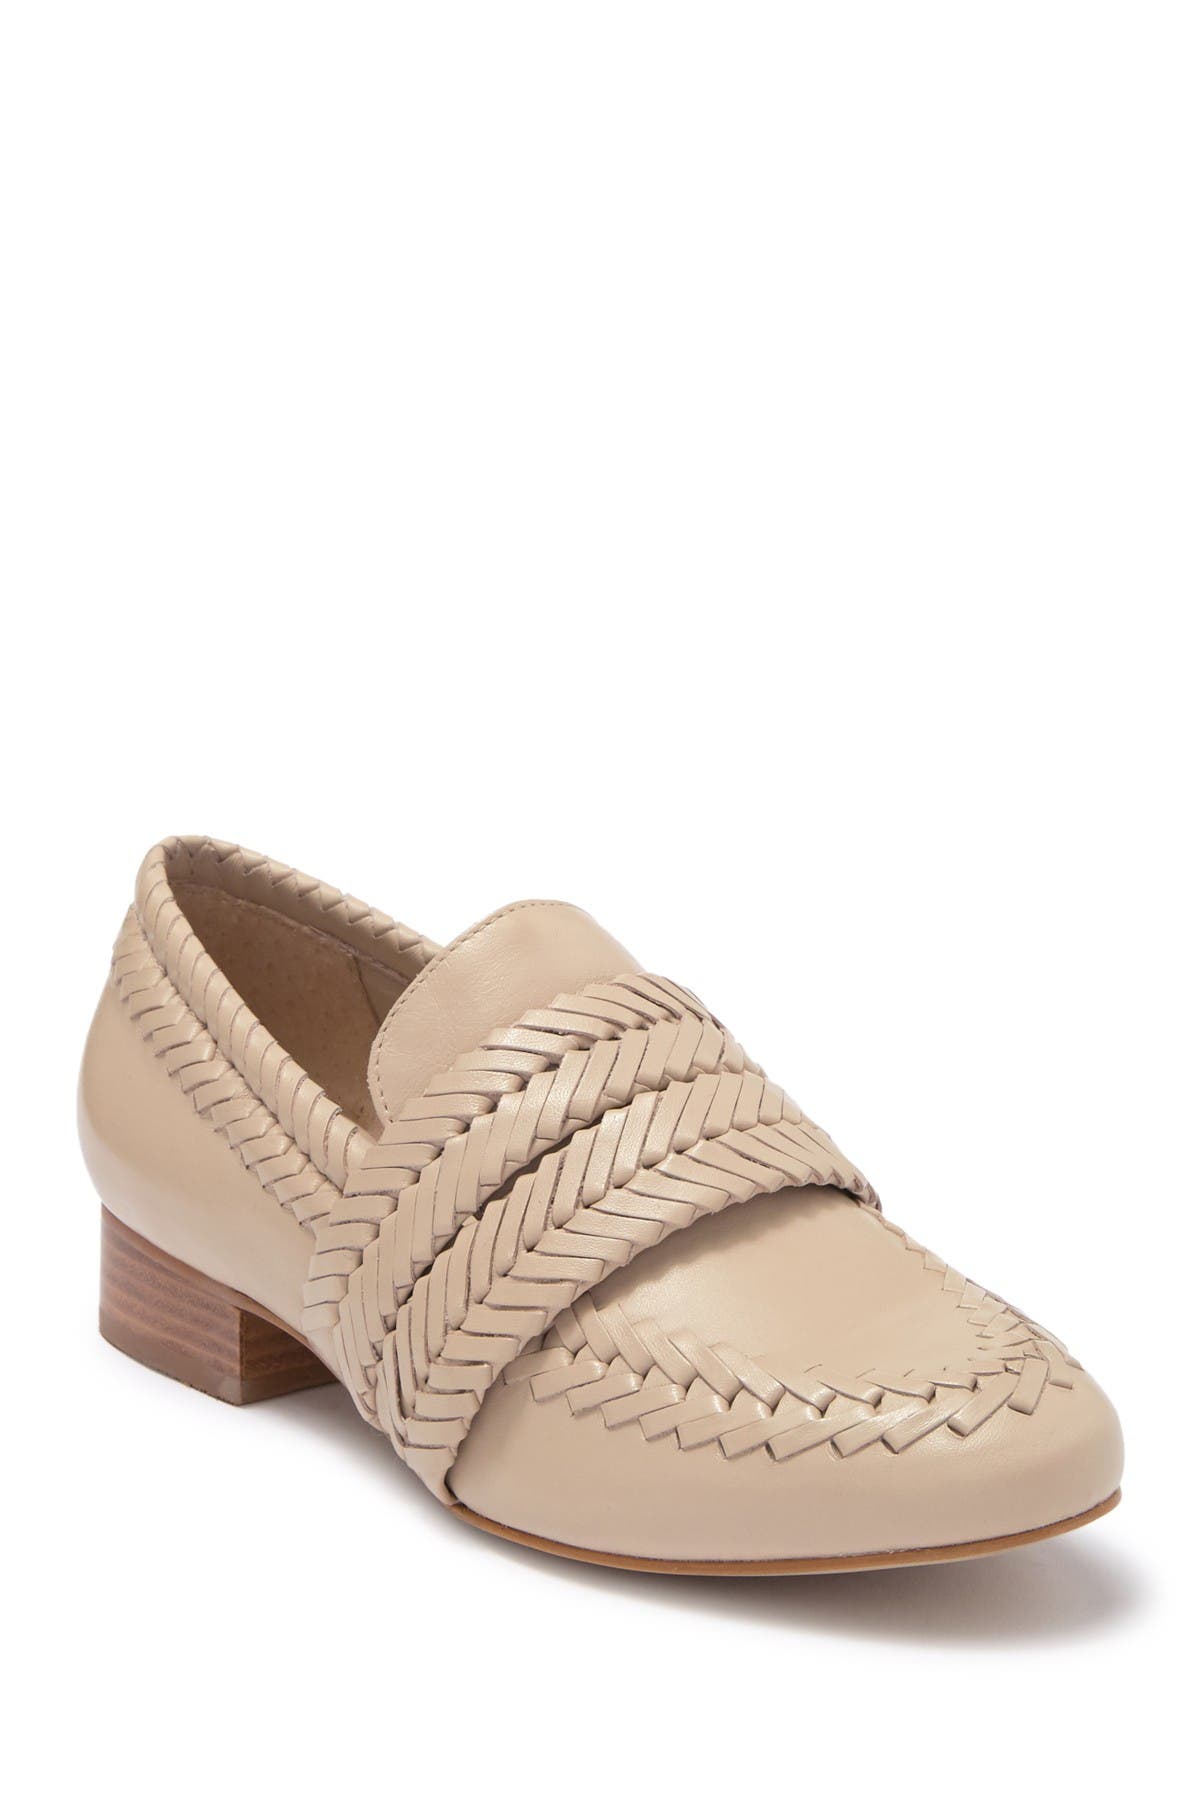 matisse edith loafers